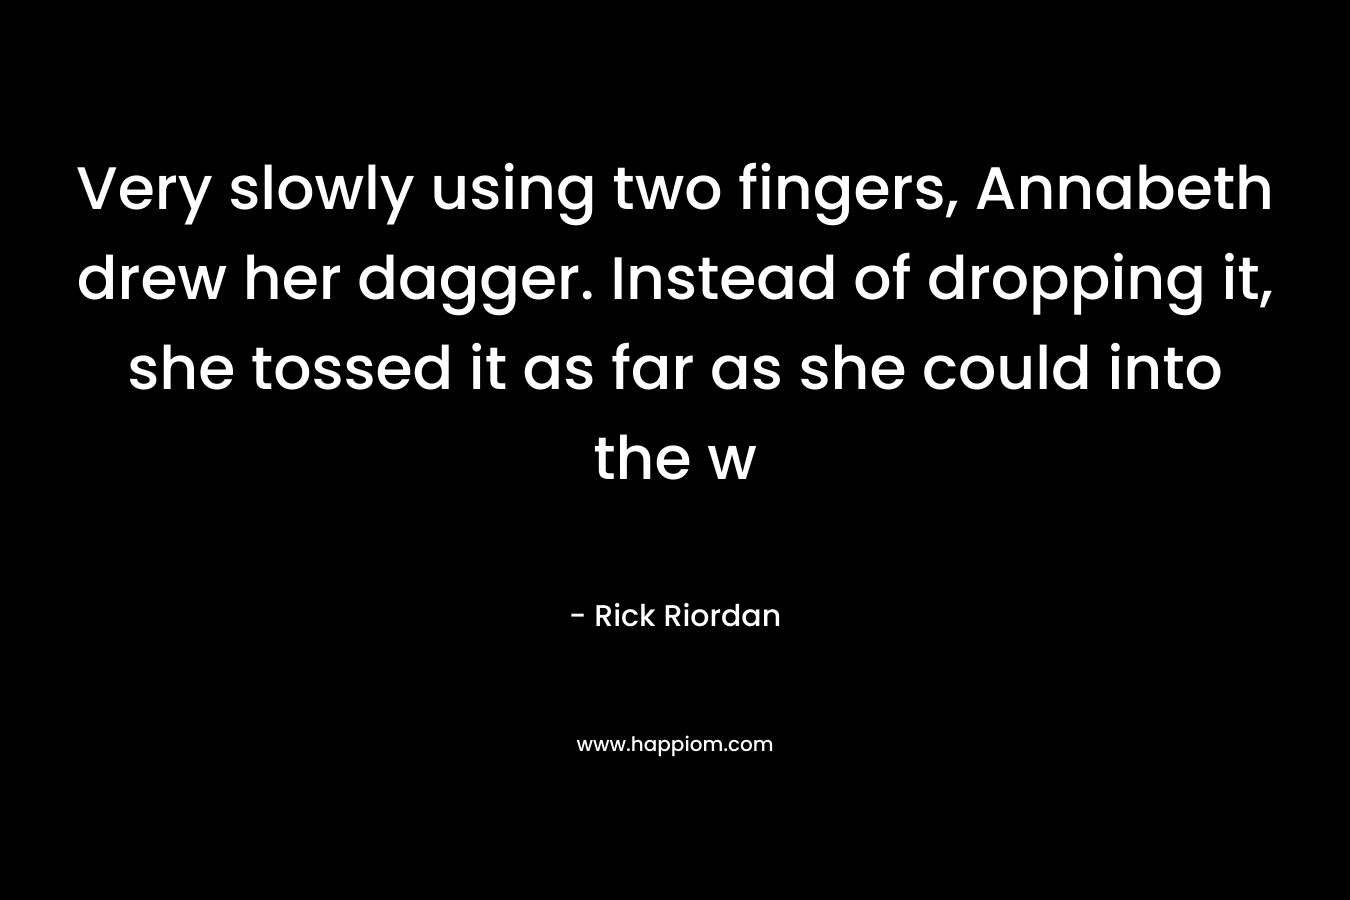 Very slowly using two fingers, Annabeth drew her dagger. Instead of dropping it, she tossed it as far as she could into the w – Rick Riordan